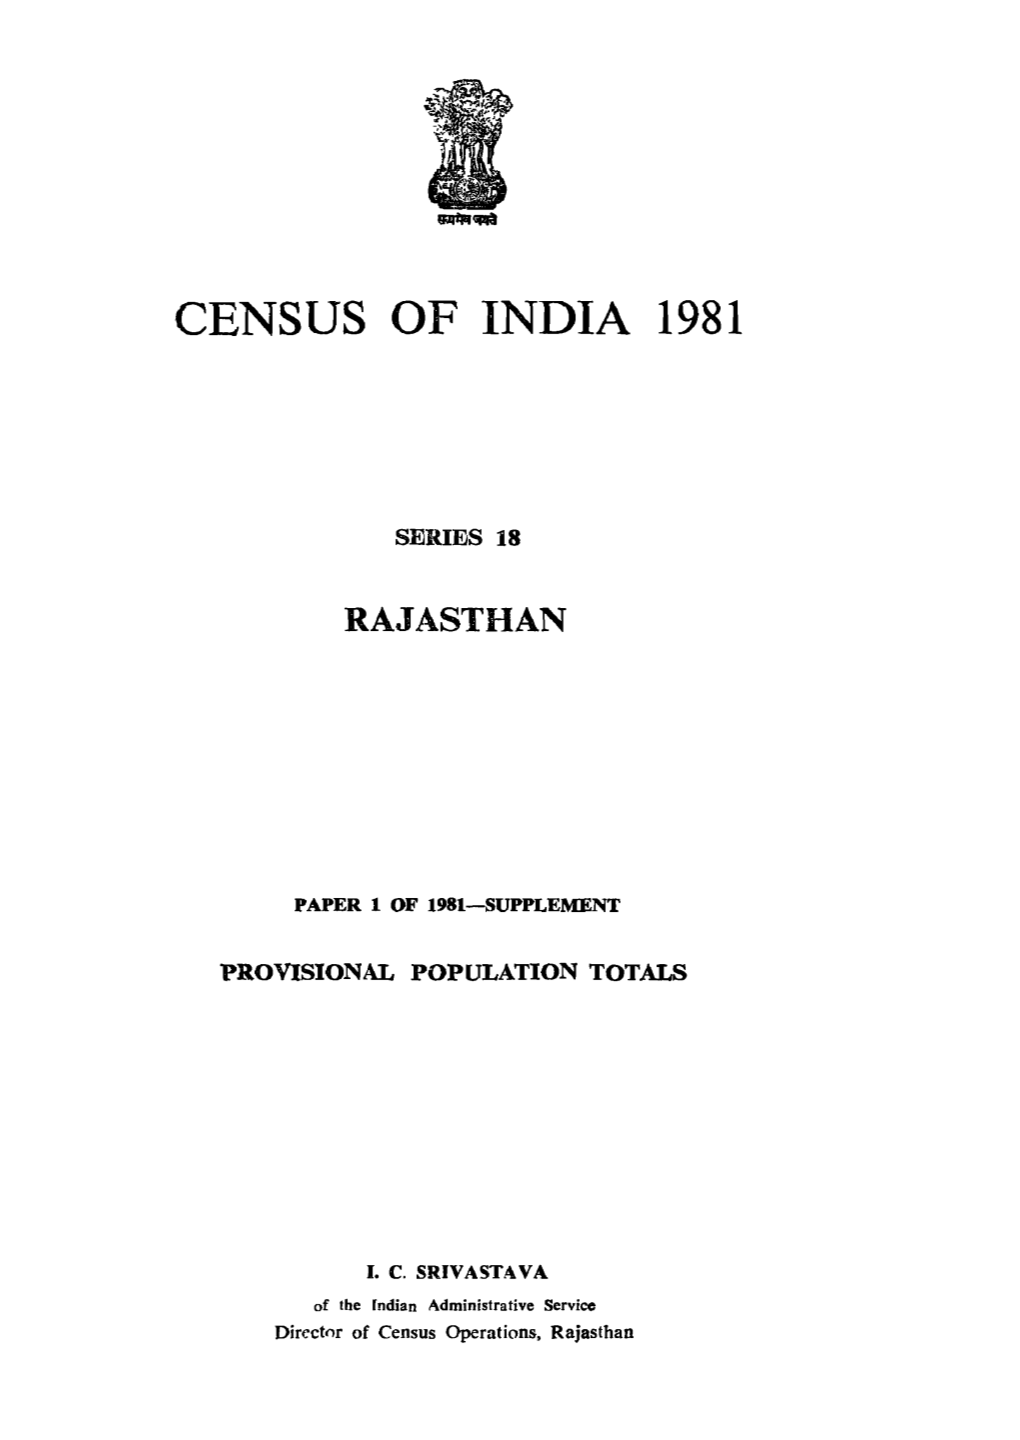 Provisional Population Totals, Rajasthan